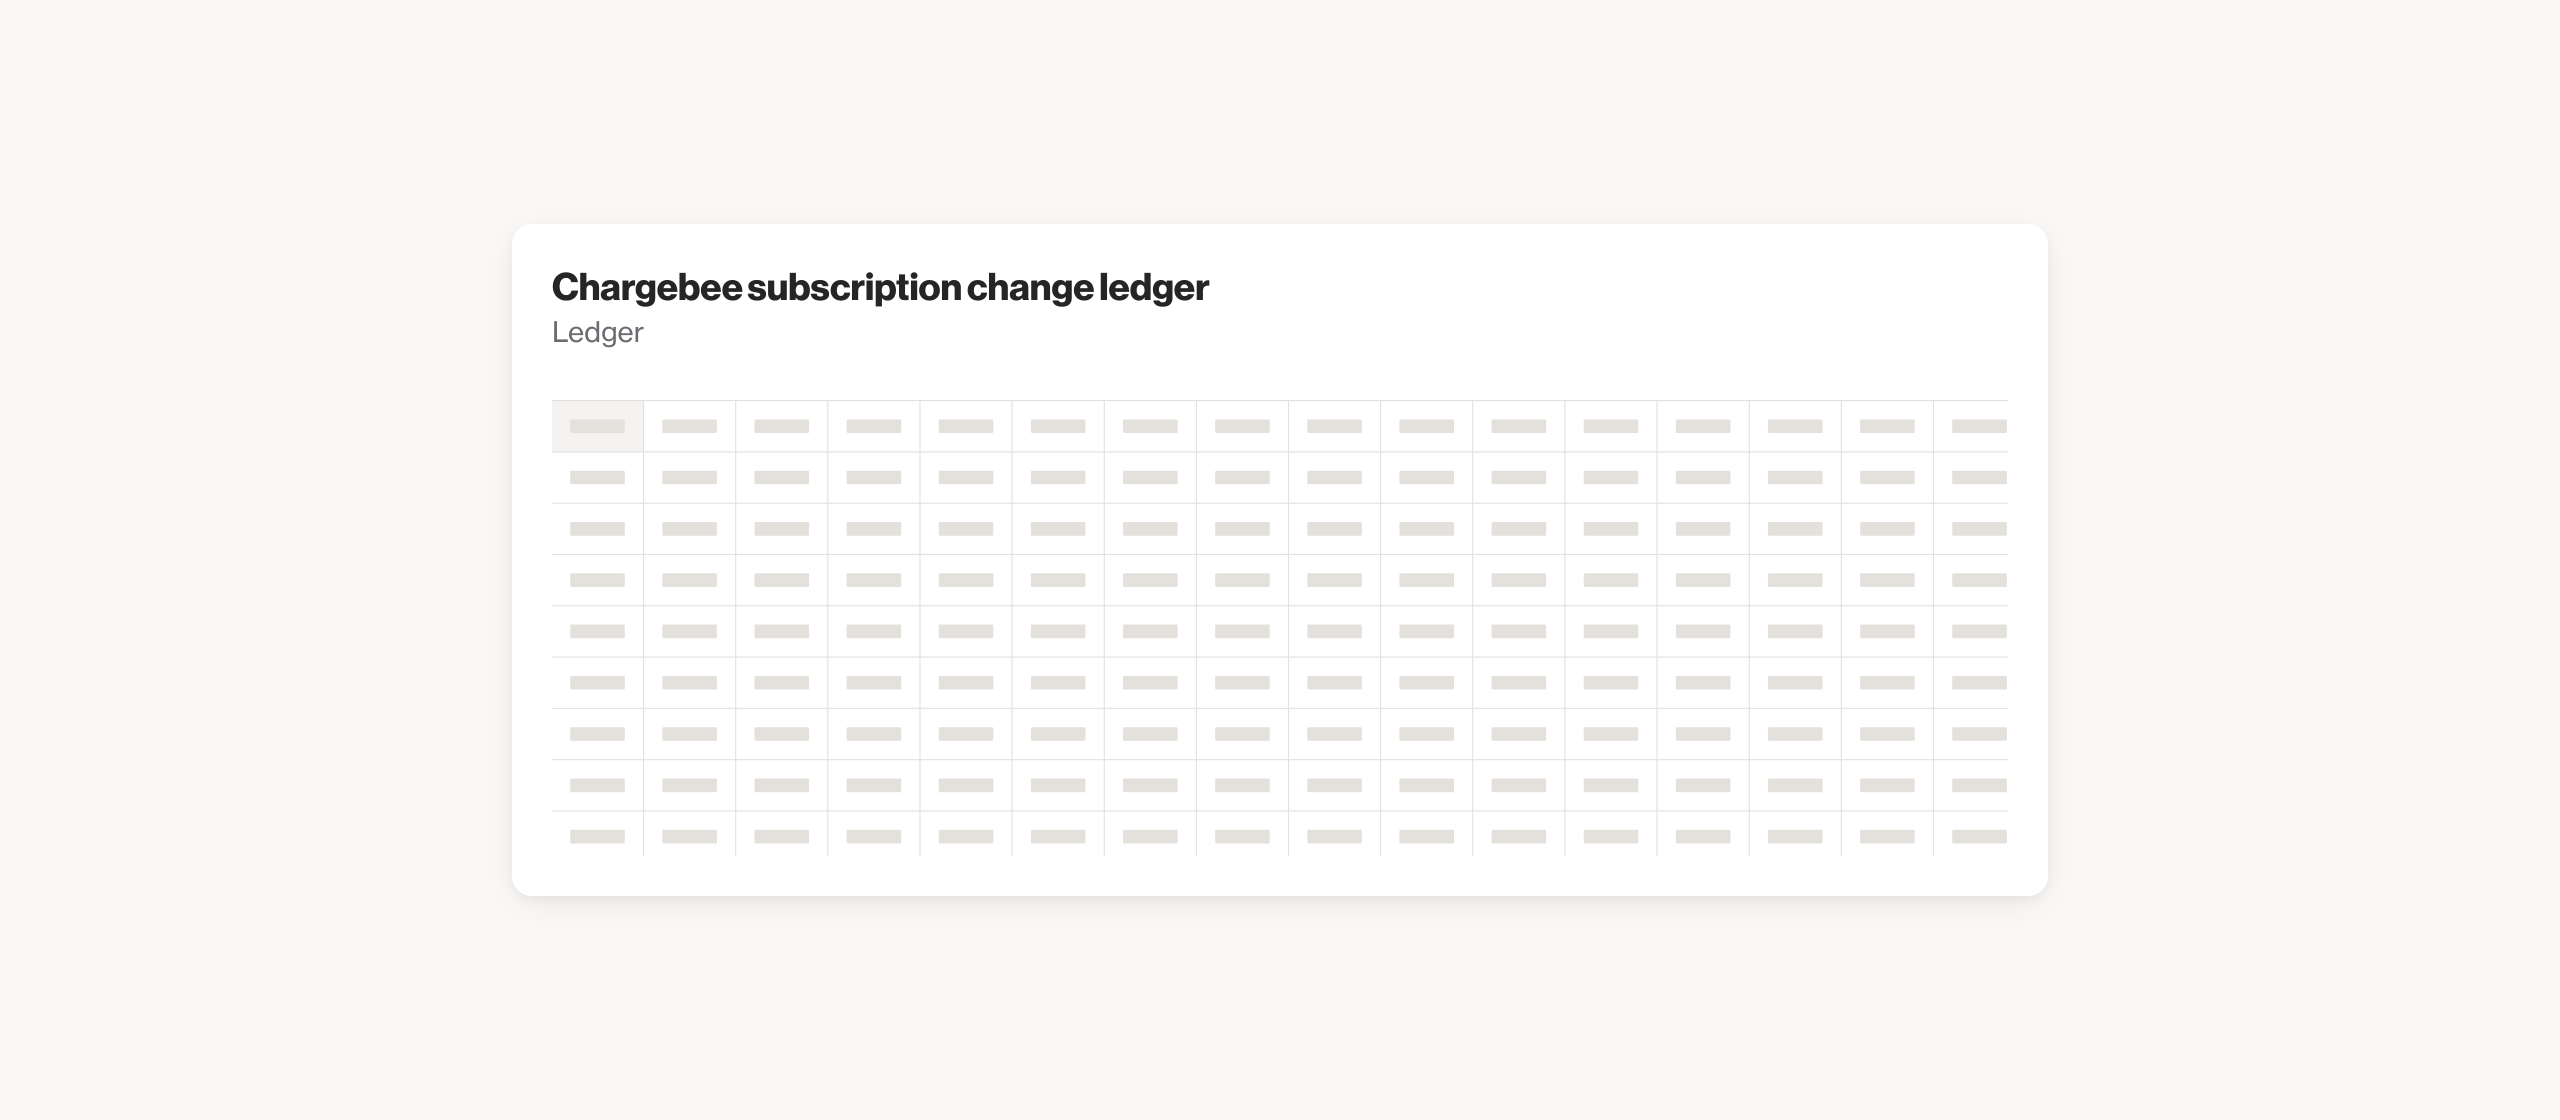 Chargebee subscription change ledger